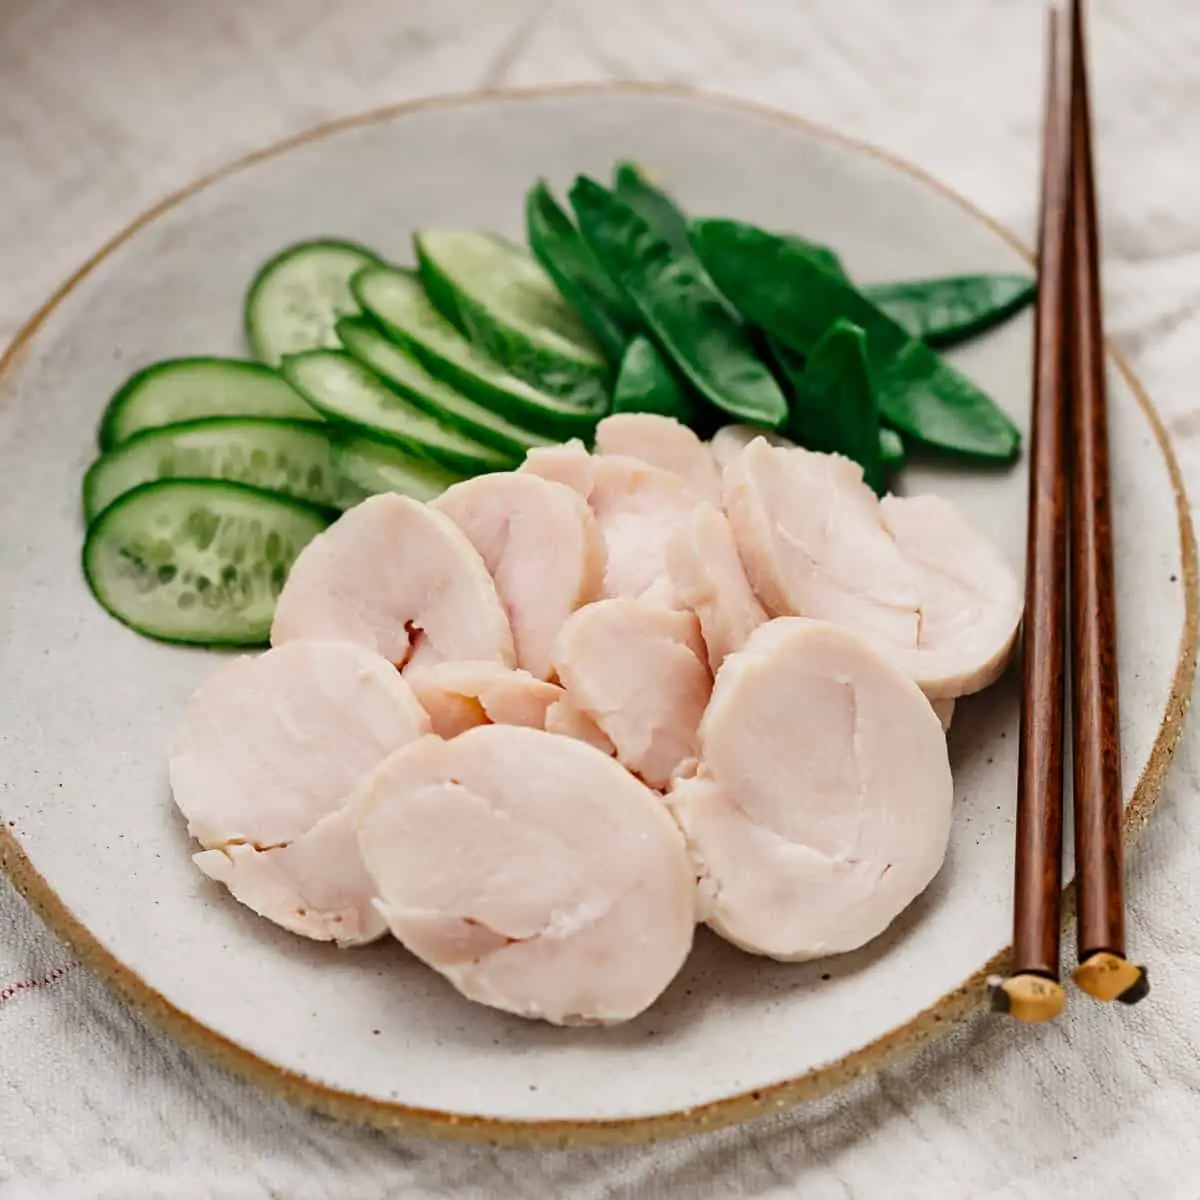 slices of chicken ham and cucumber and snap peas on a round plate with a pair of chopsticks